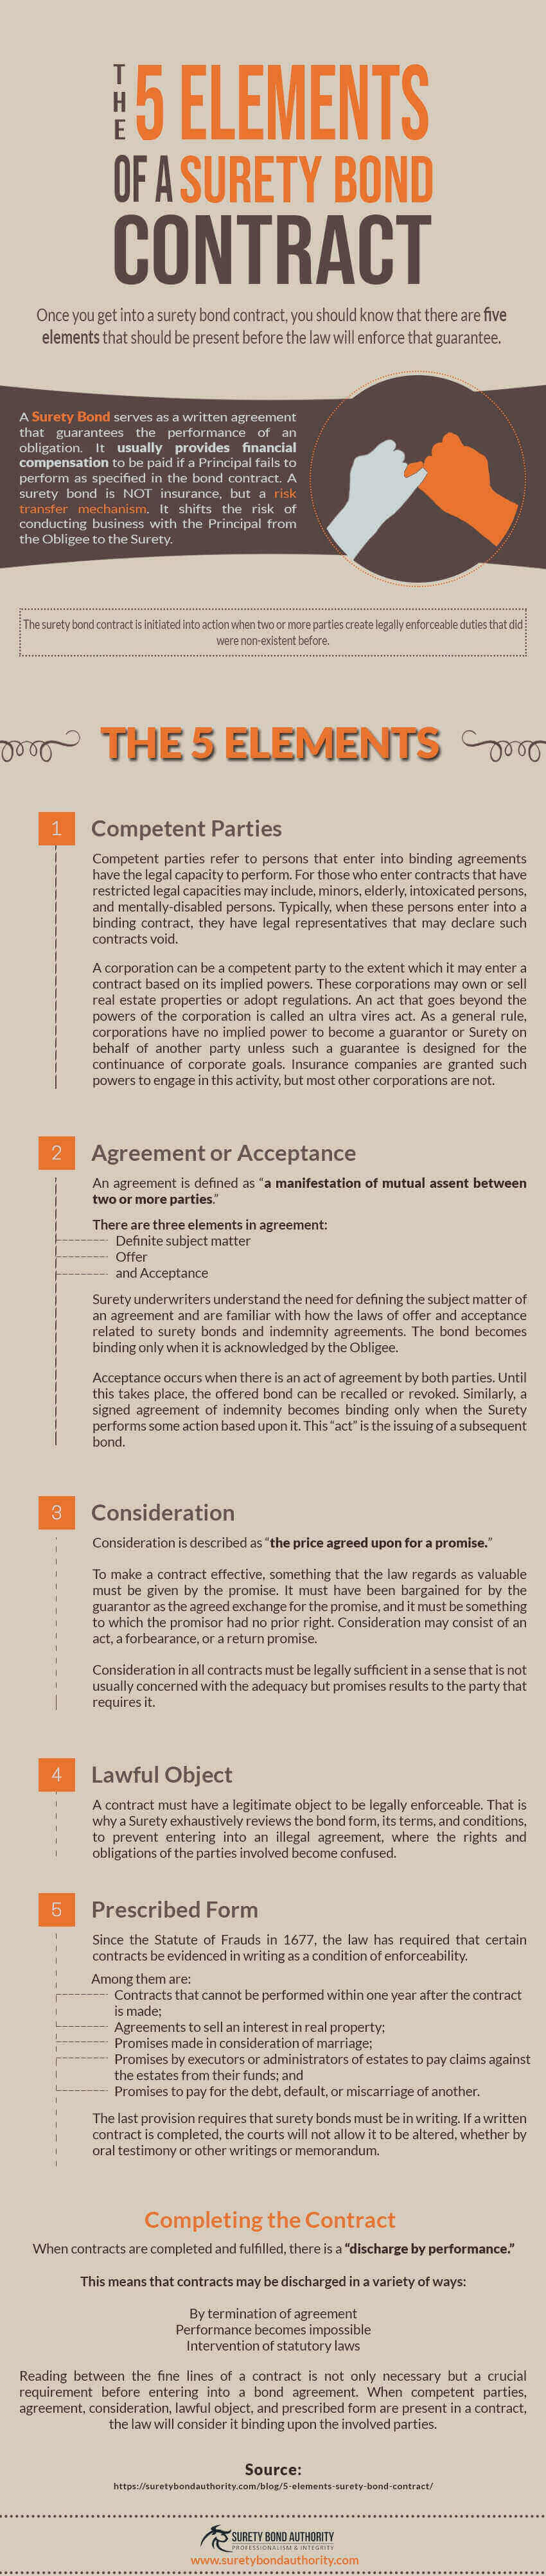 Elements of Surety Bond Contract Infographic